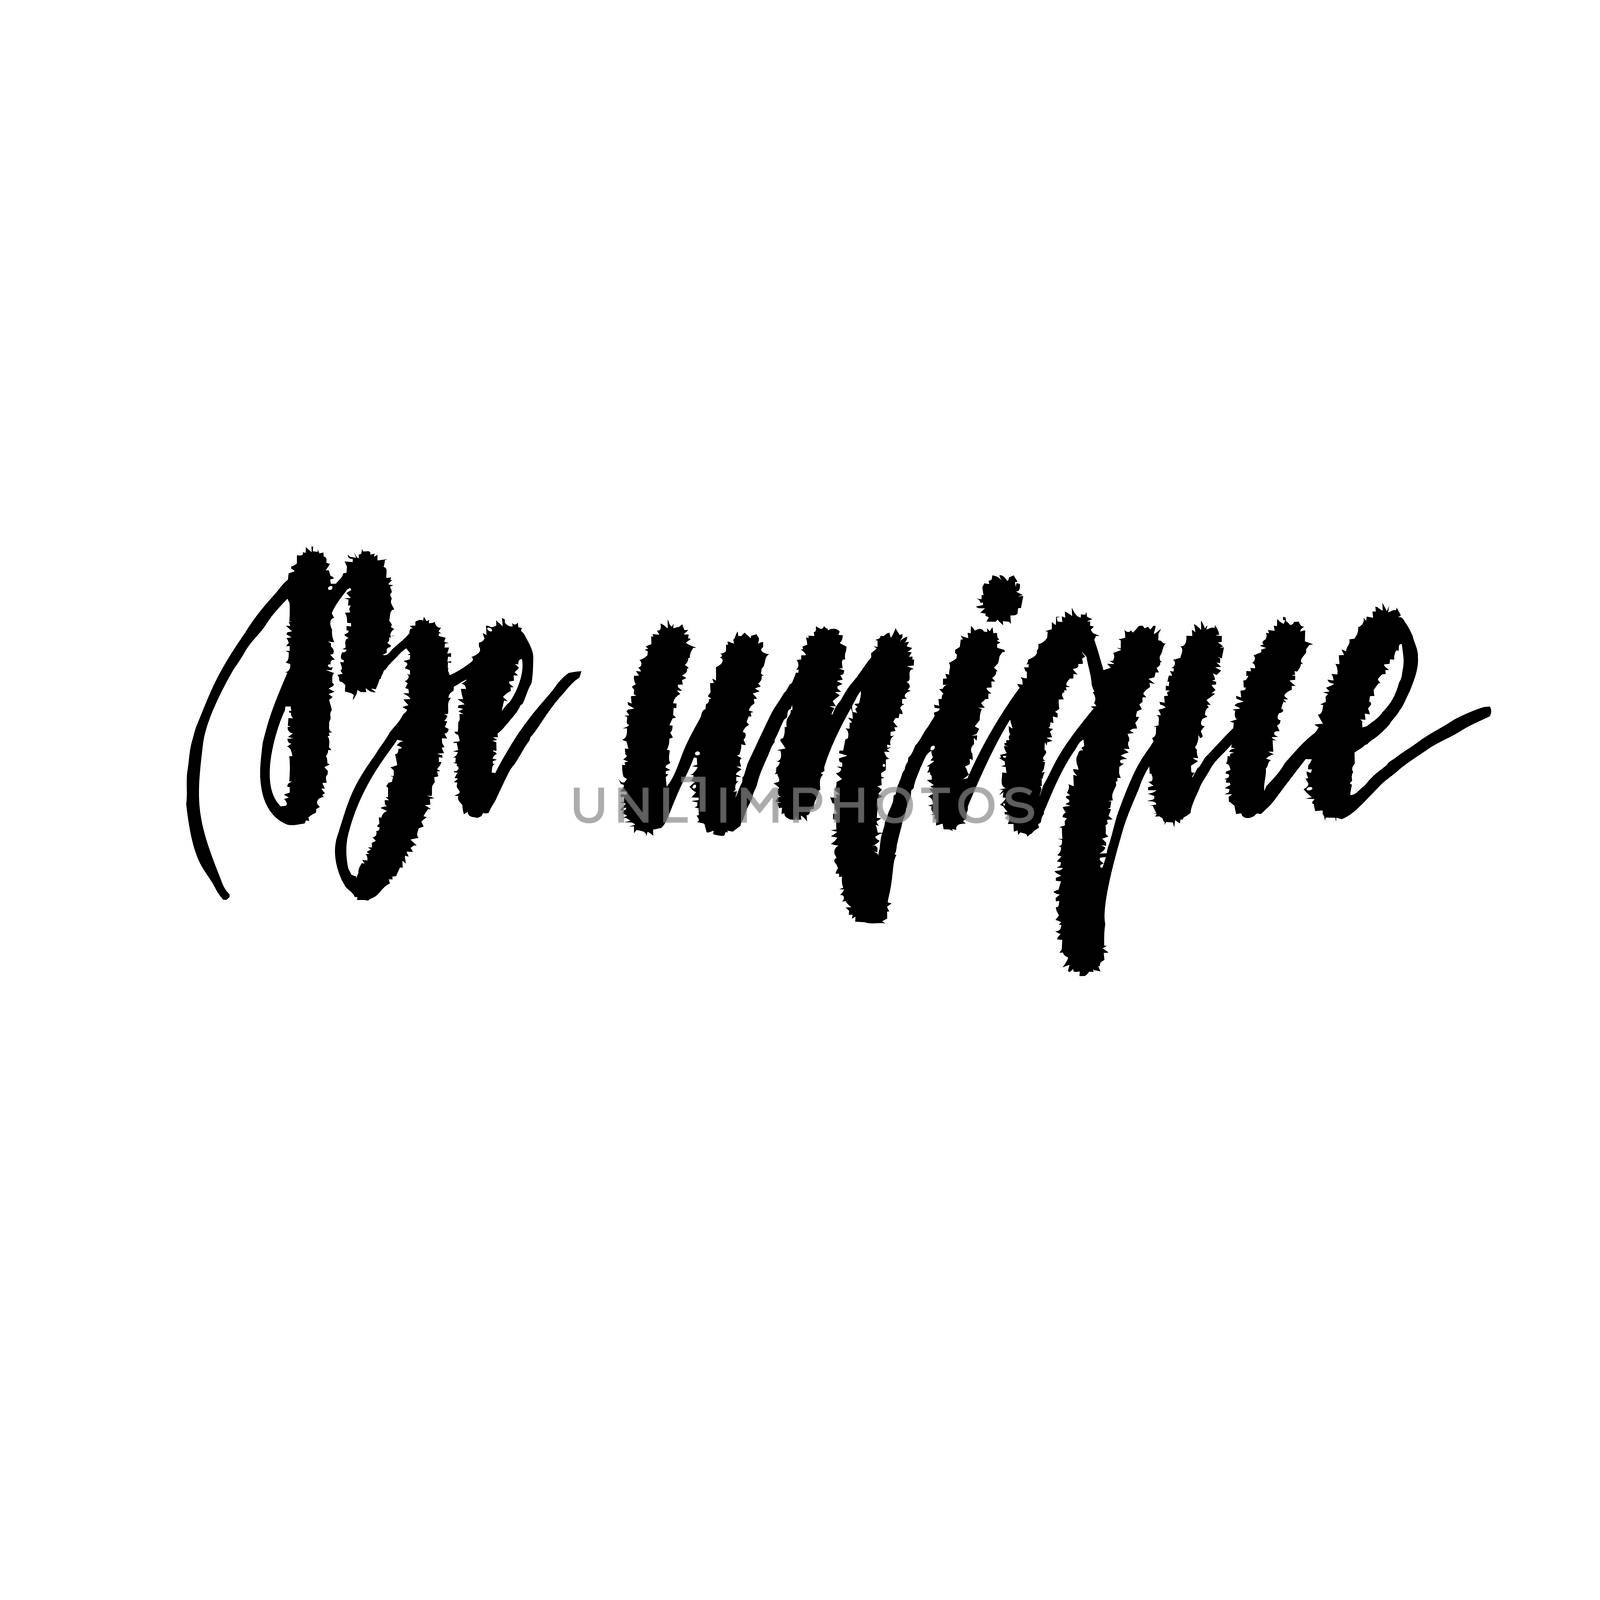 Be unique. Motivational and inspirational handwritten lettering isolated on white background. illustration for posters, cards, print on t-shirts and much more.